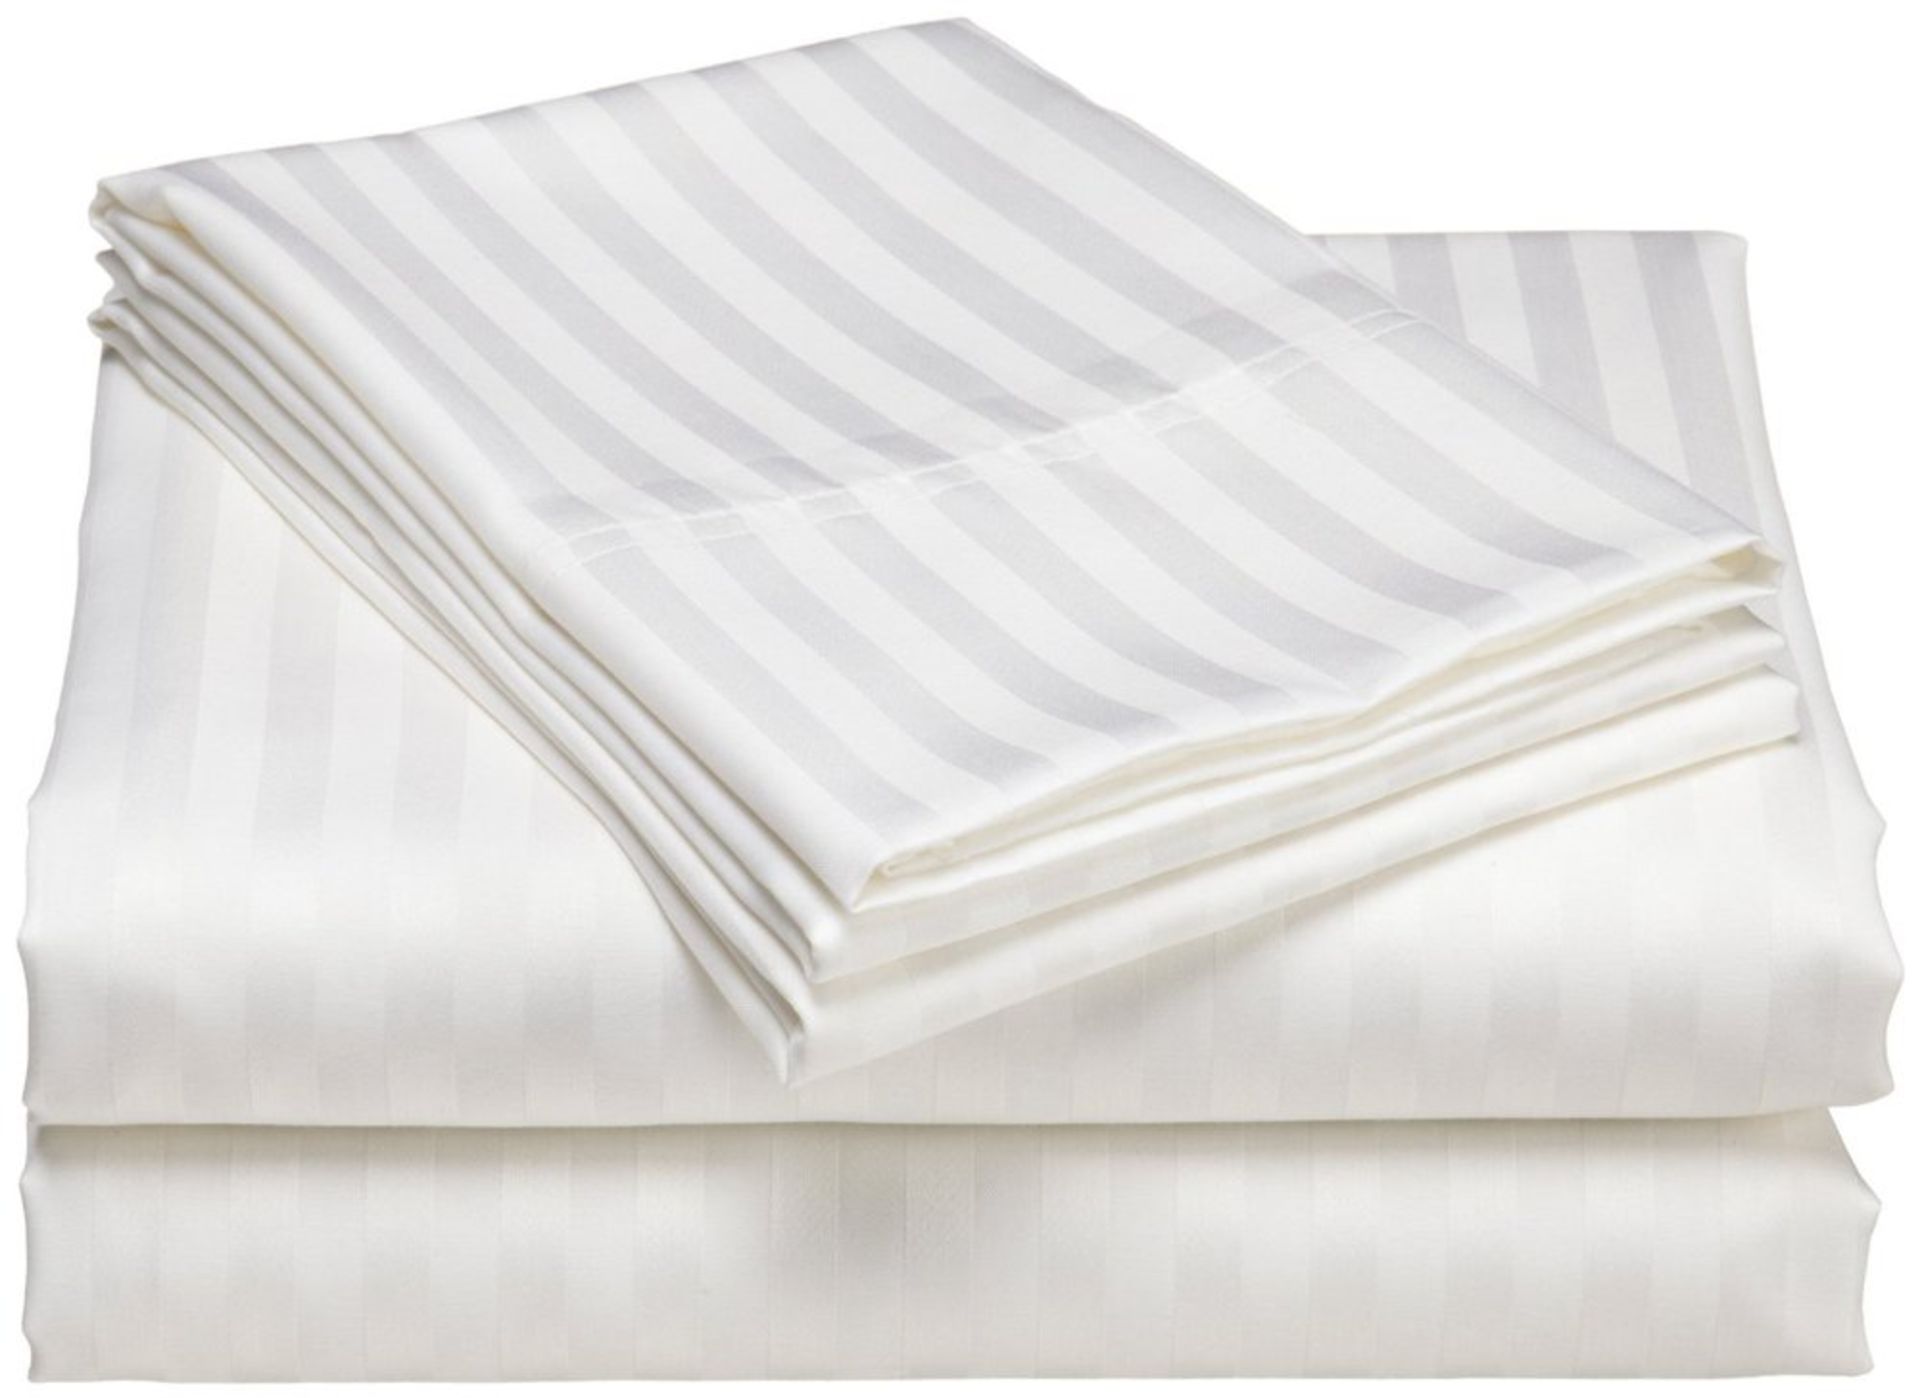 V Brand New 100% Egyptian Cotton Double Size Fitted Sheet RRP £25.50 X 2 Bid price to be